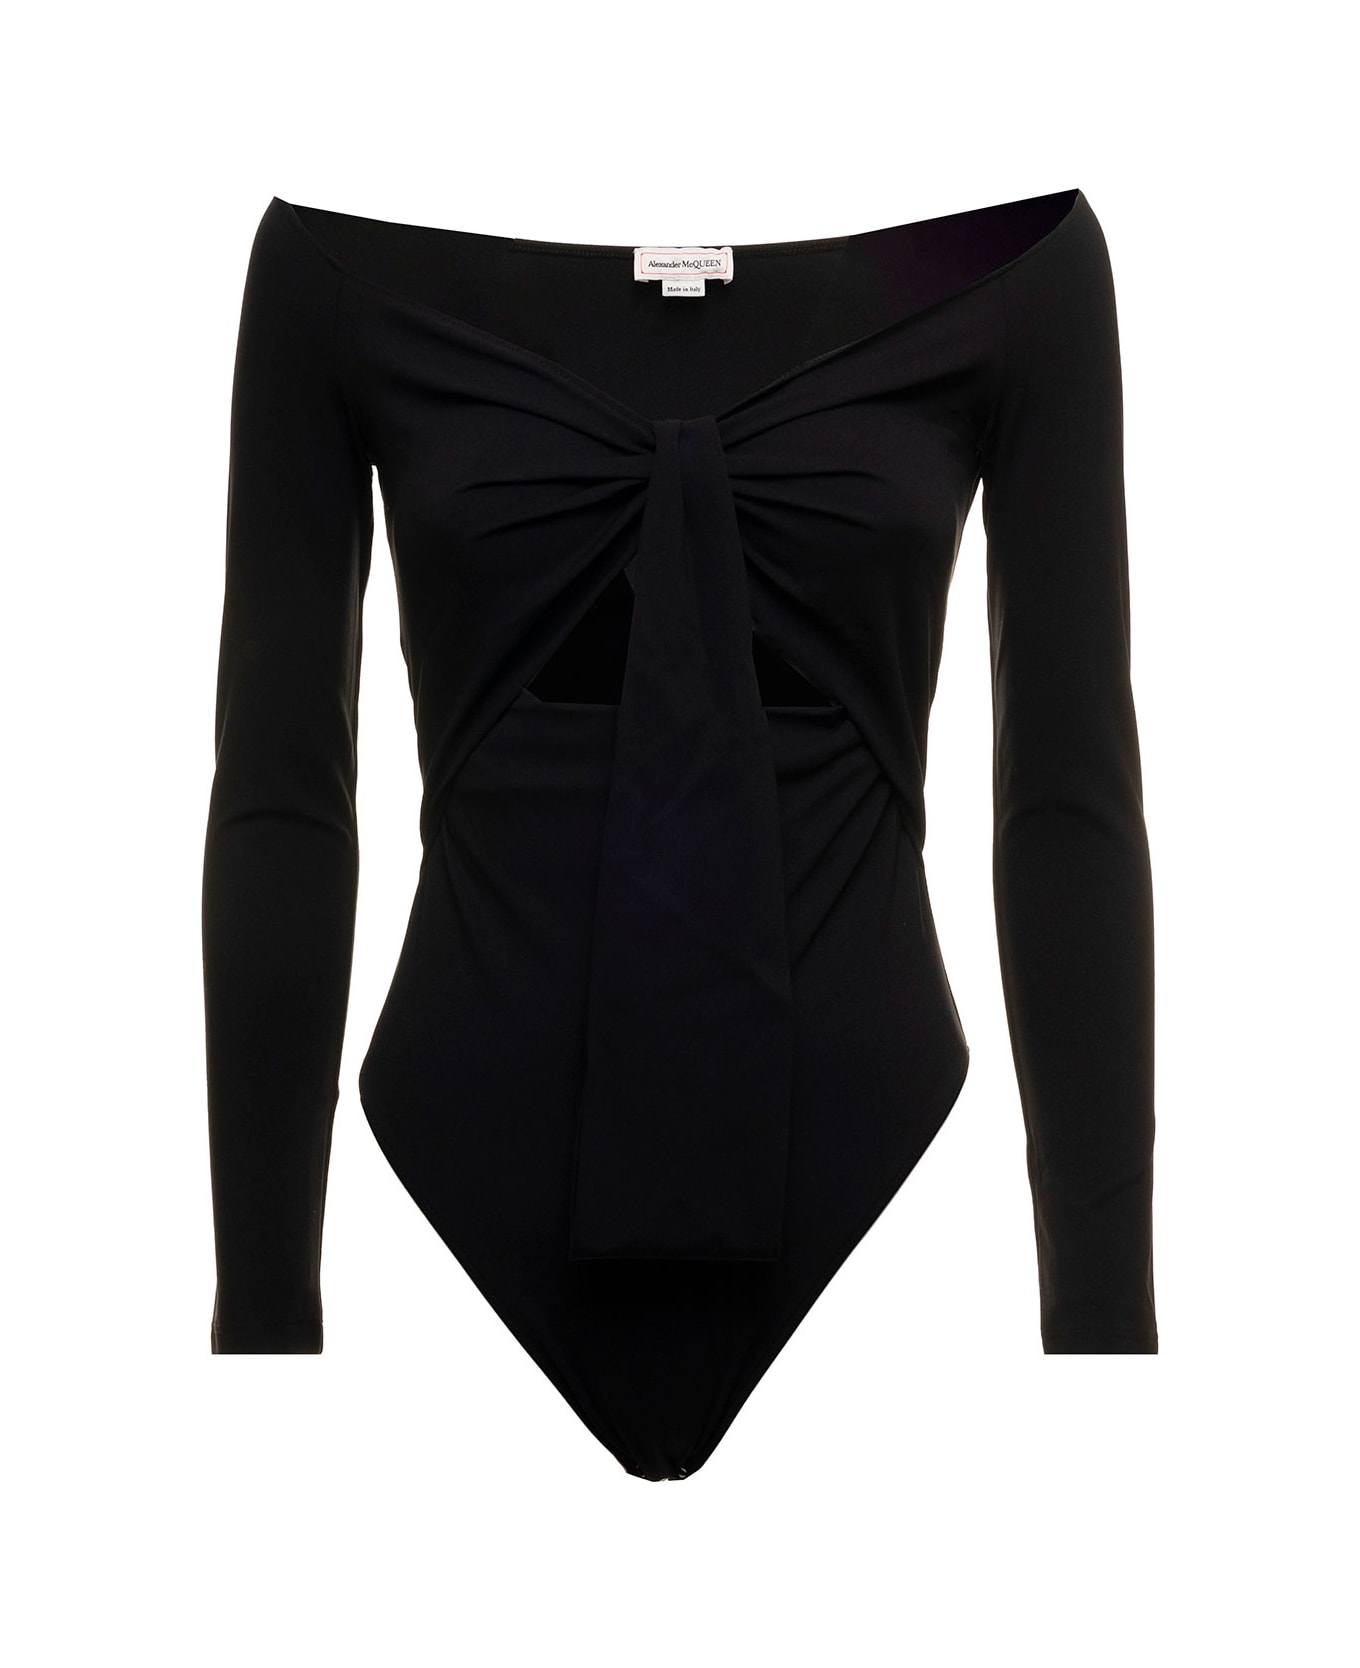 Alexander McQueen Black Stretch Fabric Body With Cut Out Inserts Woman - Nero